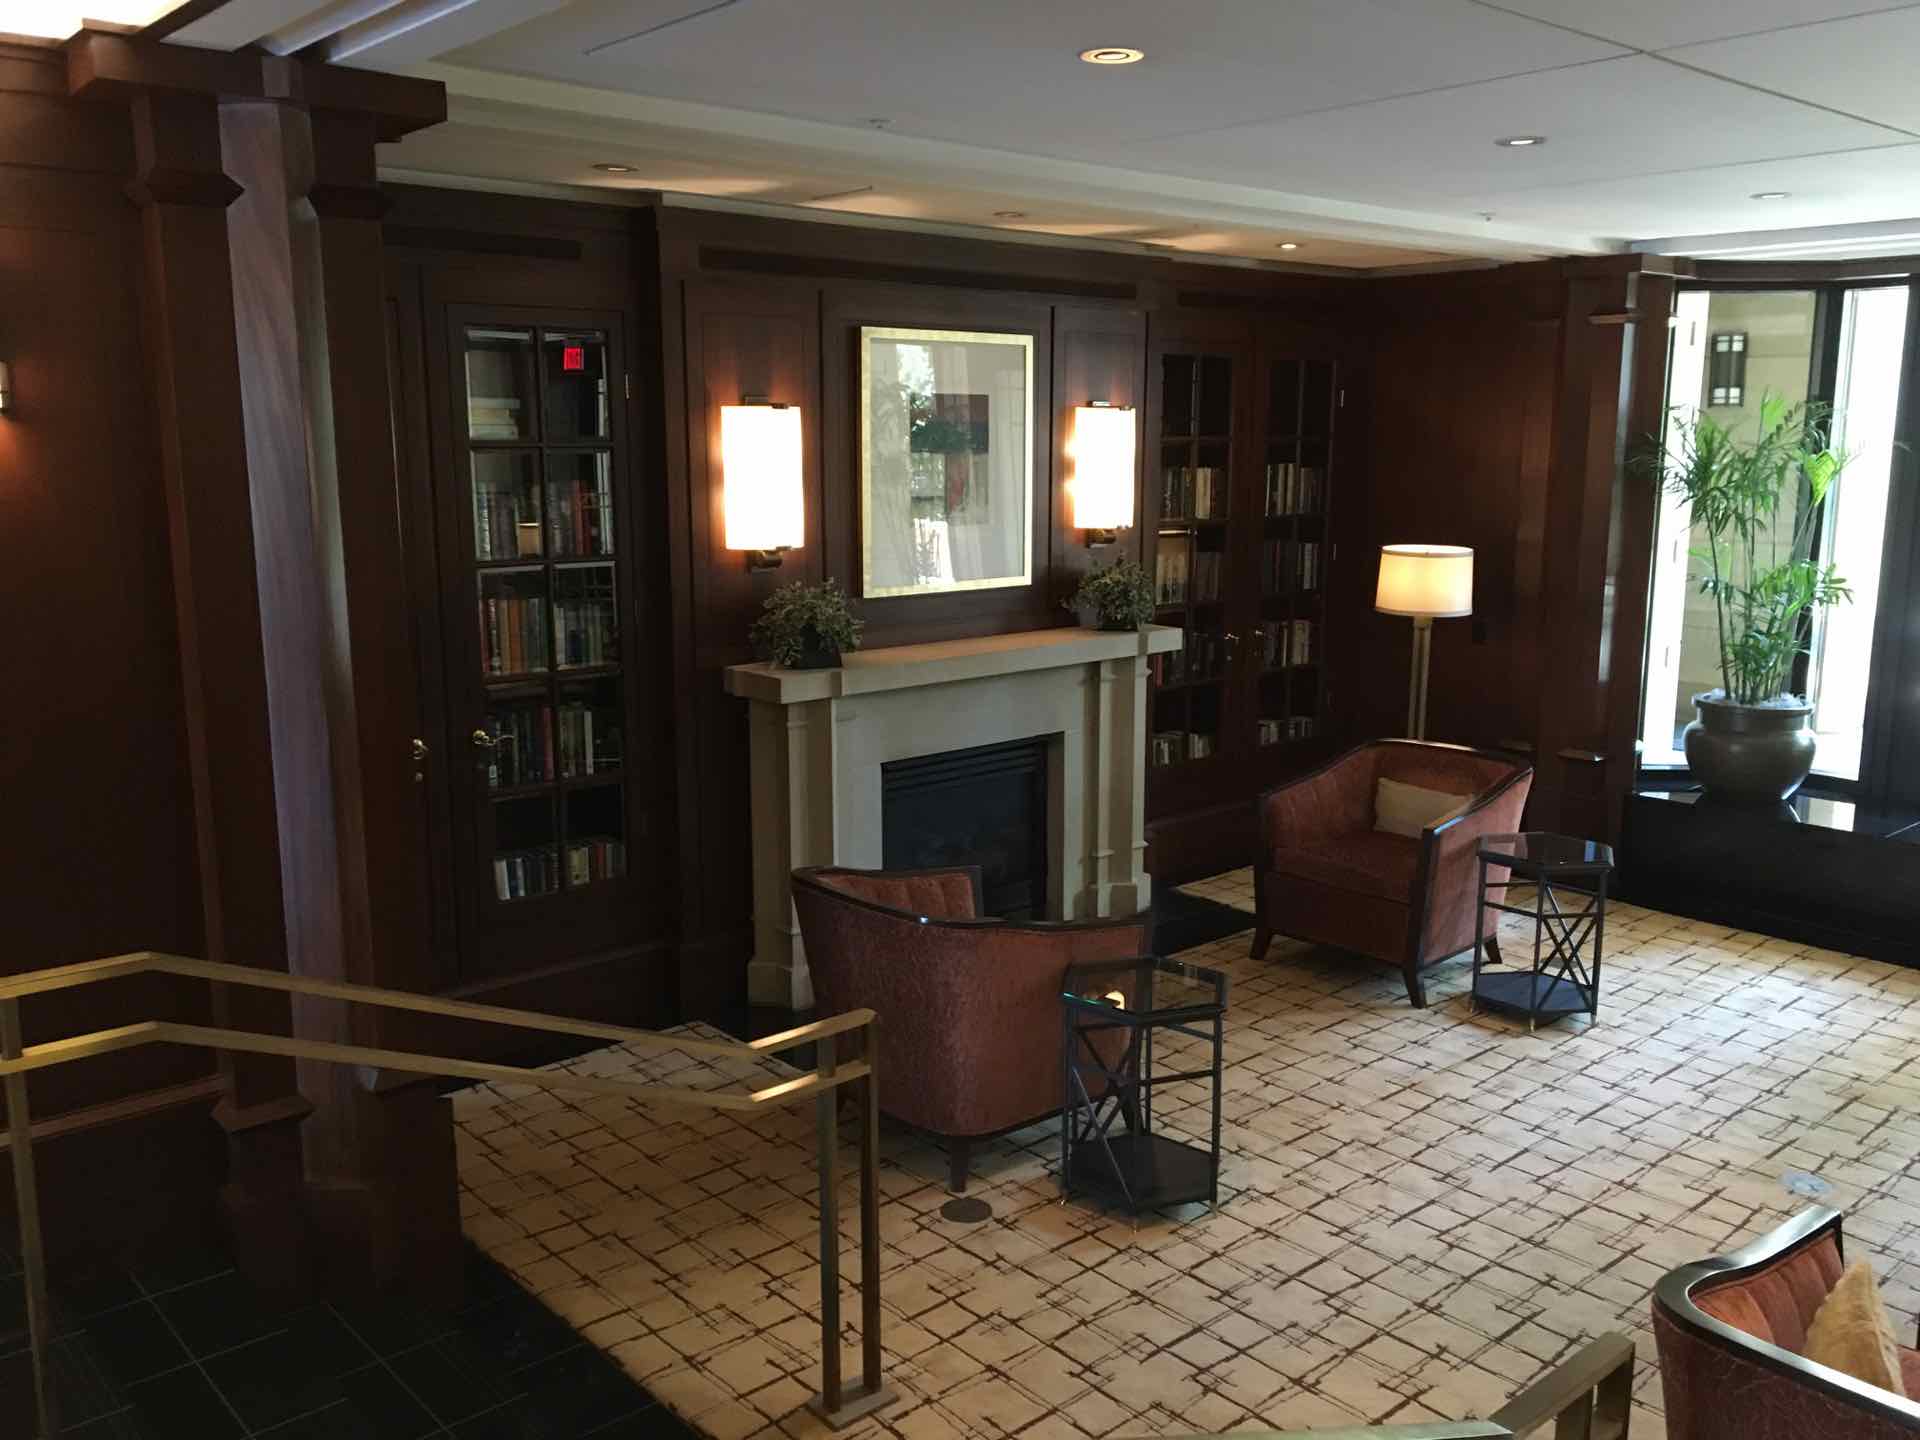 lobby seating area next to a fireplace